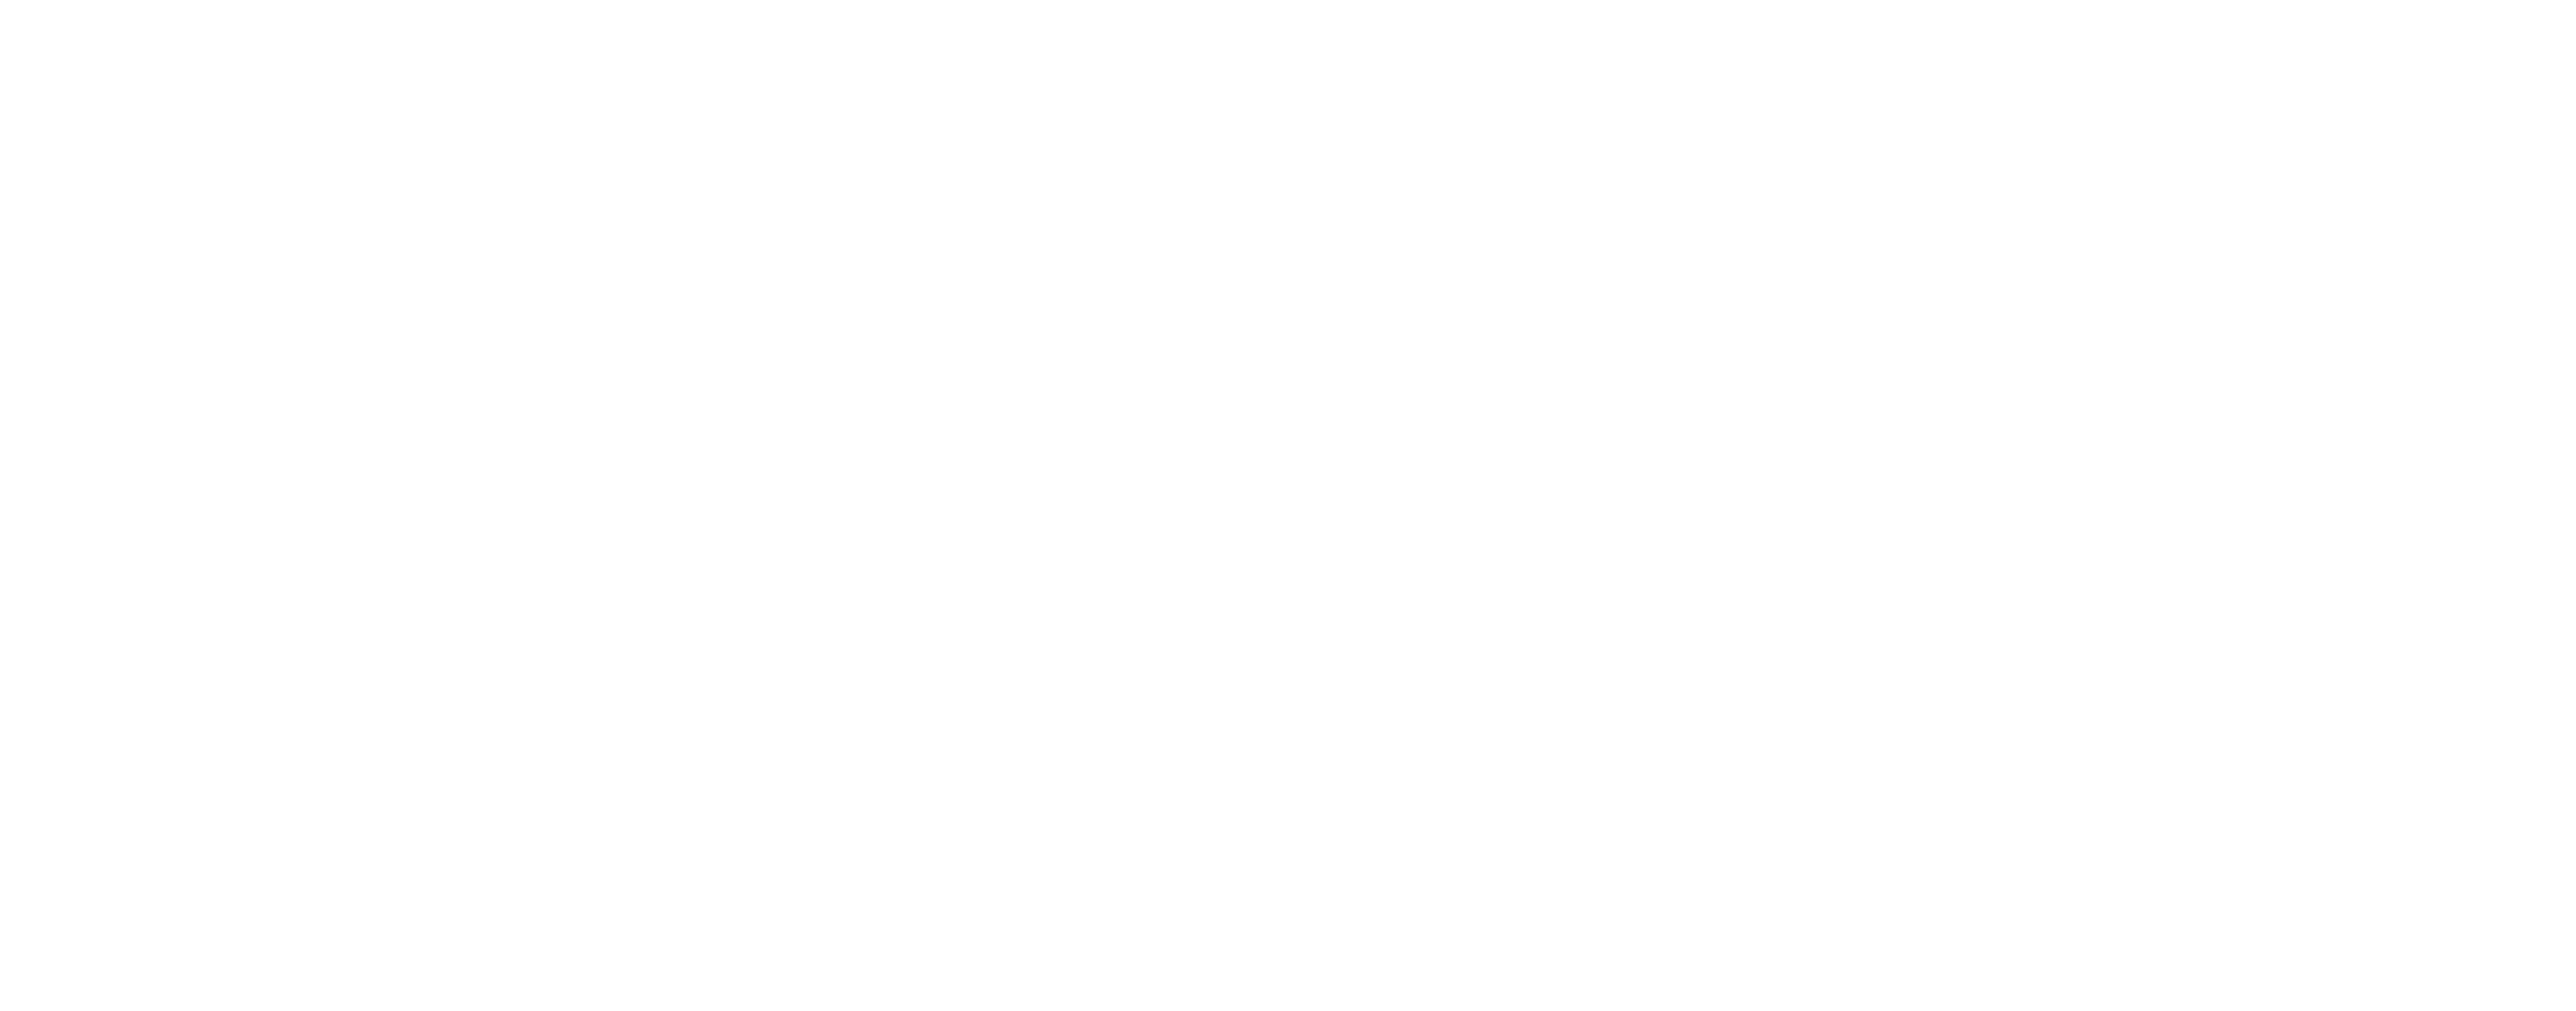 Flujo brand logo with stylized hexagon and bracketed initials 'FJ' in white on a black background